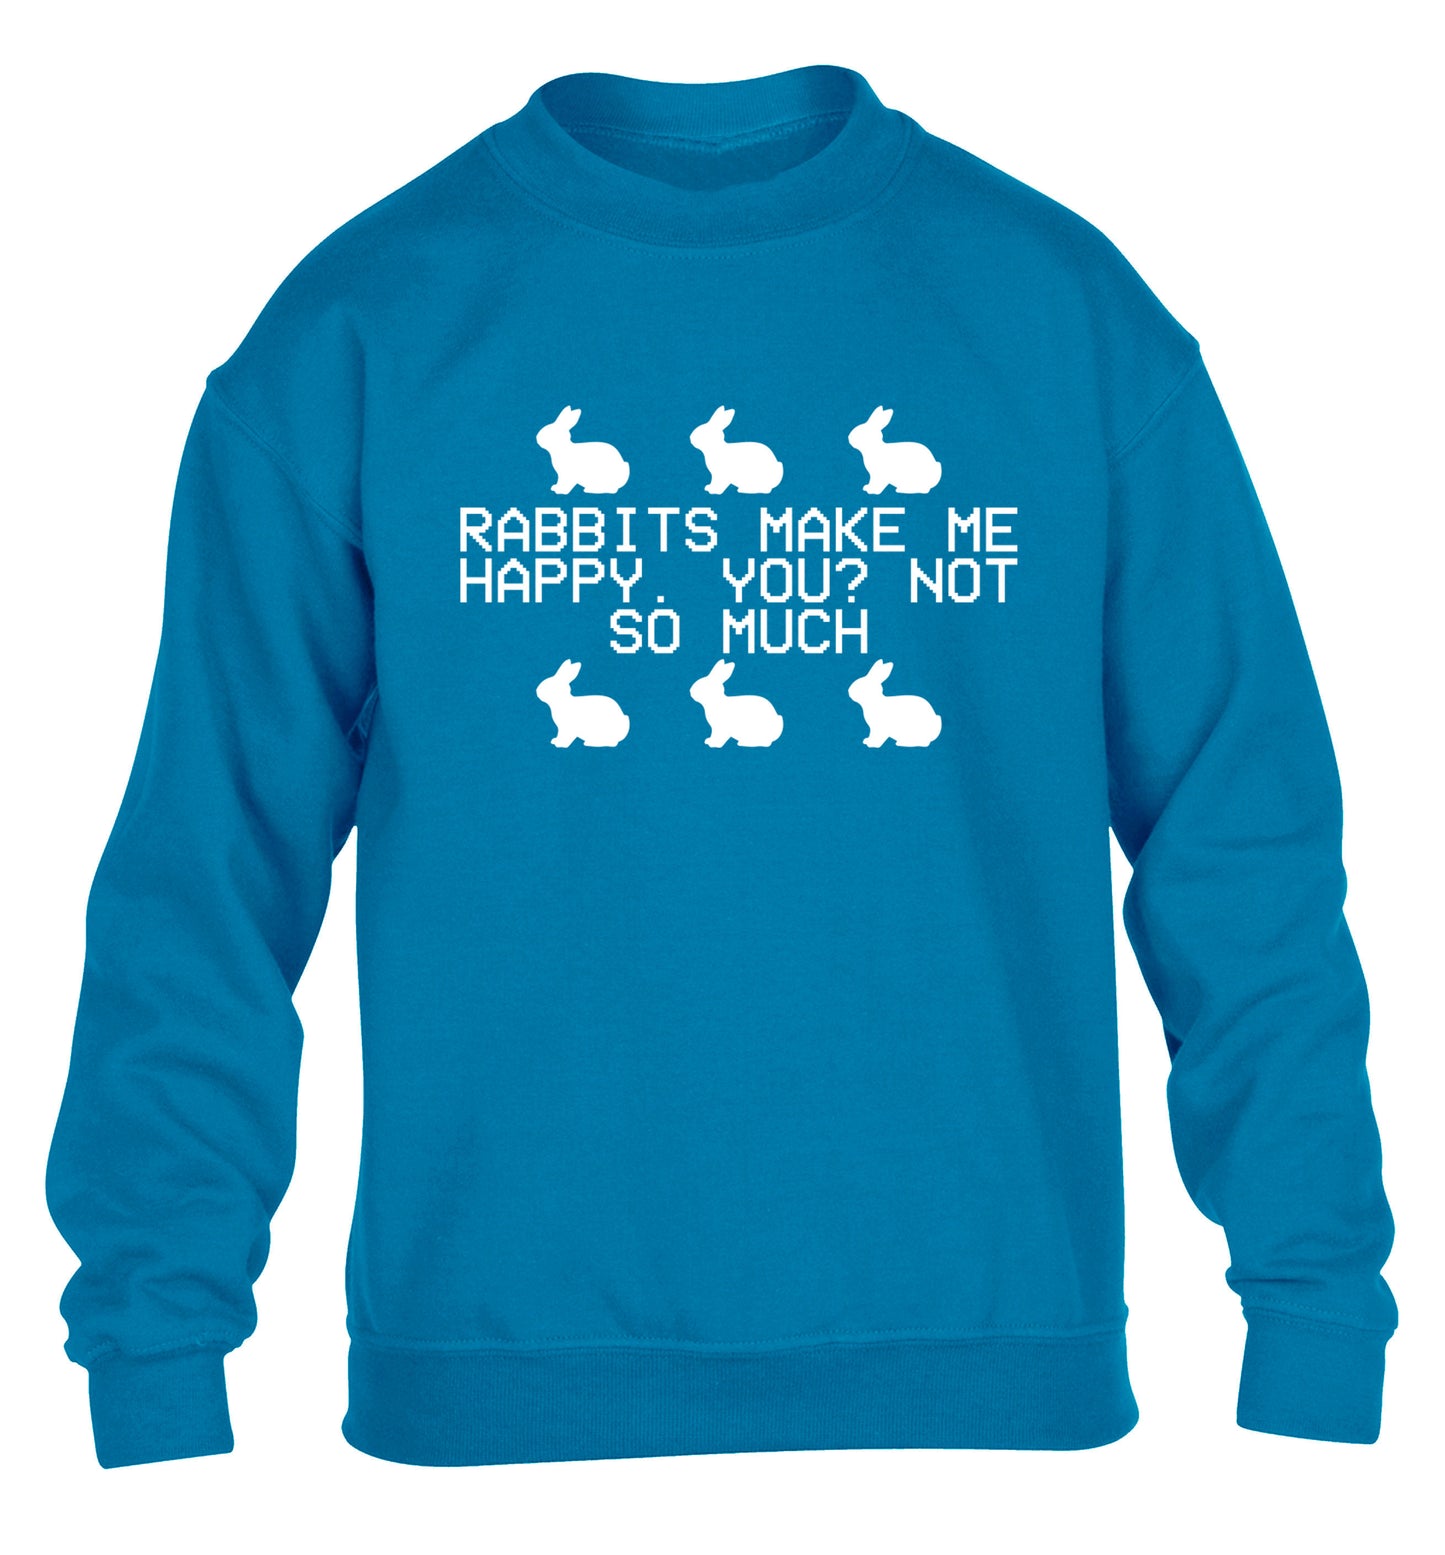 Rabbits make me happy, you not so much children's blue  sweater 12-14 Years